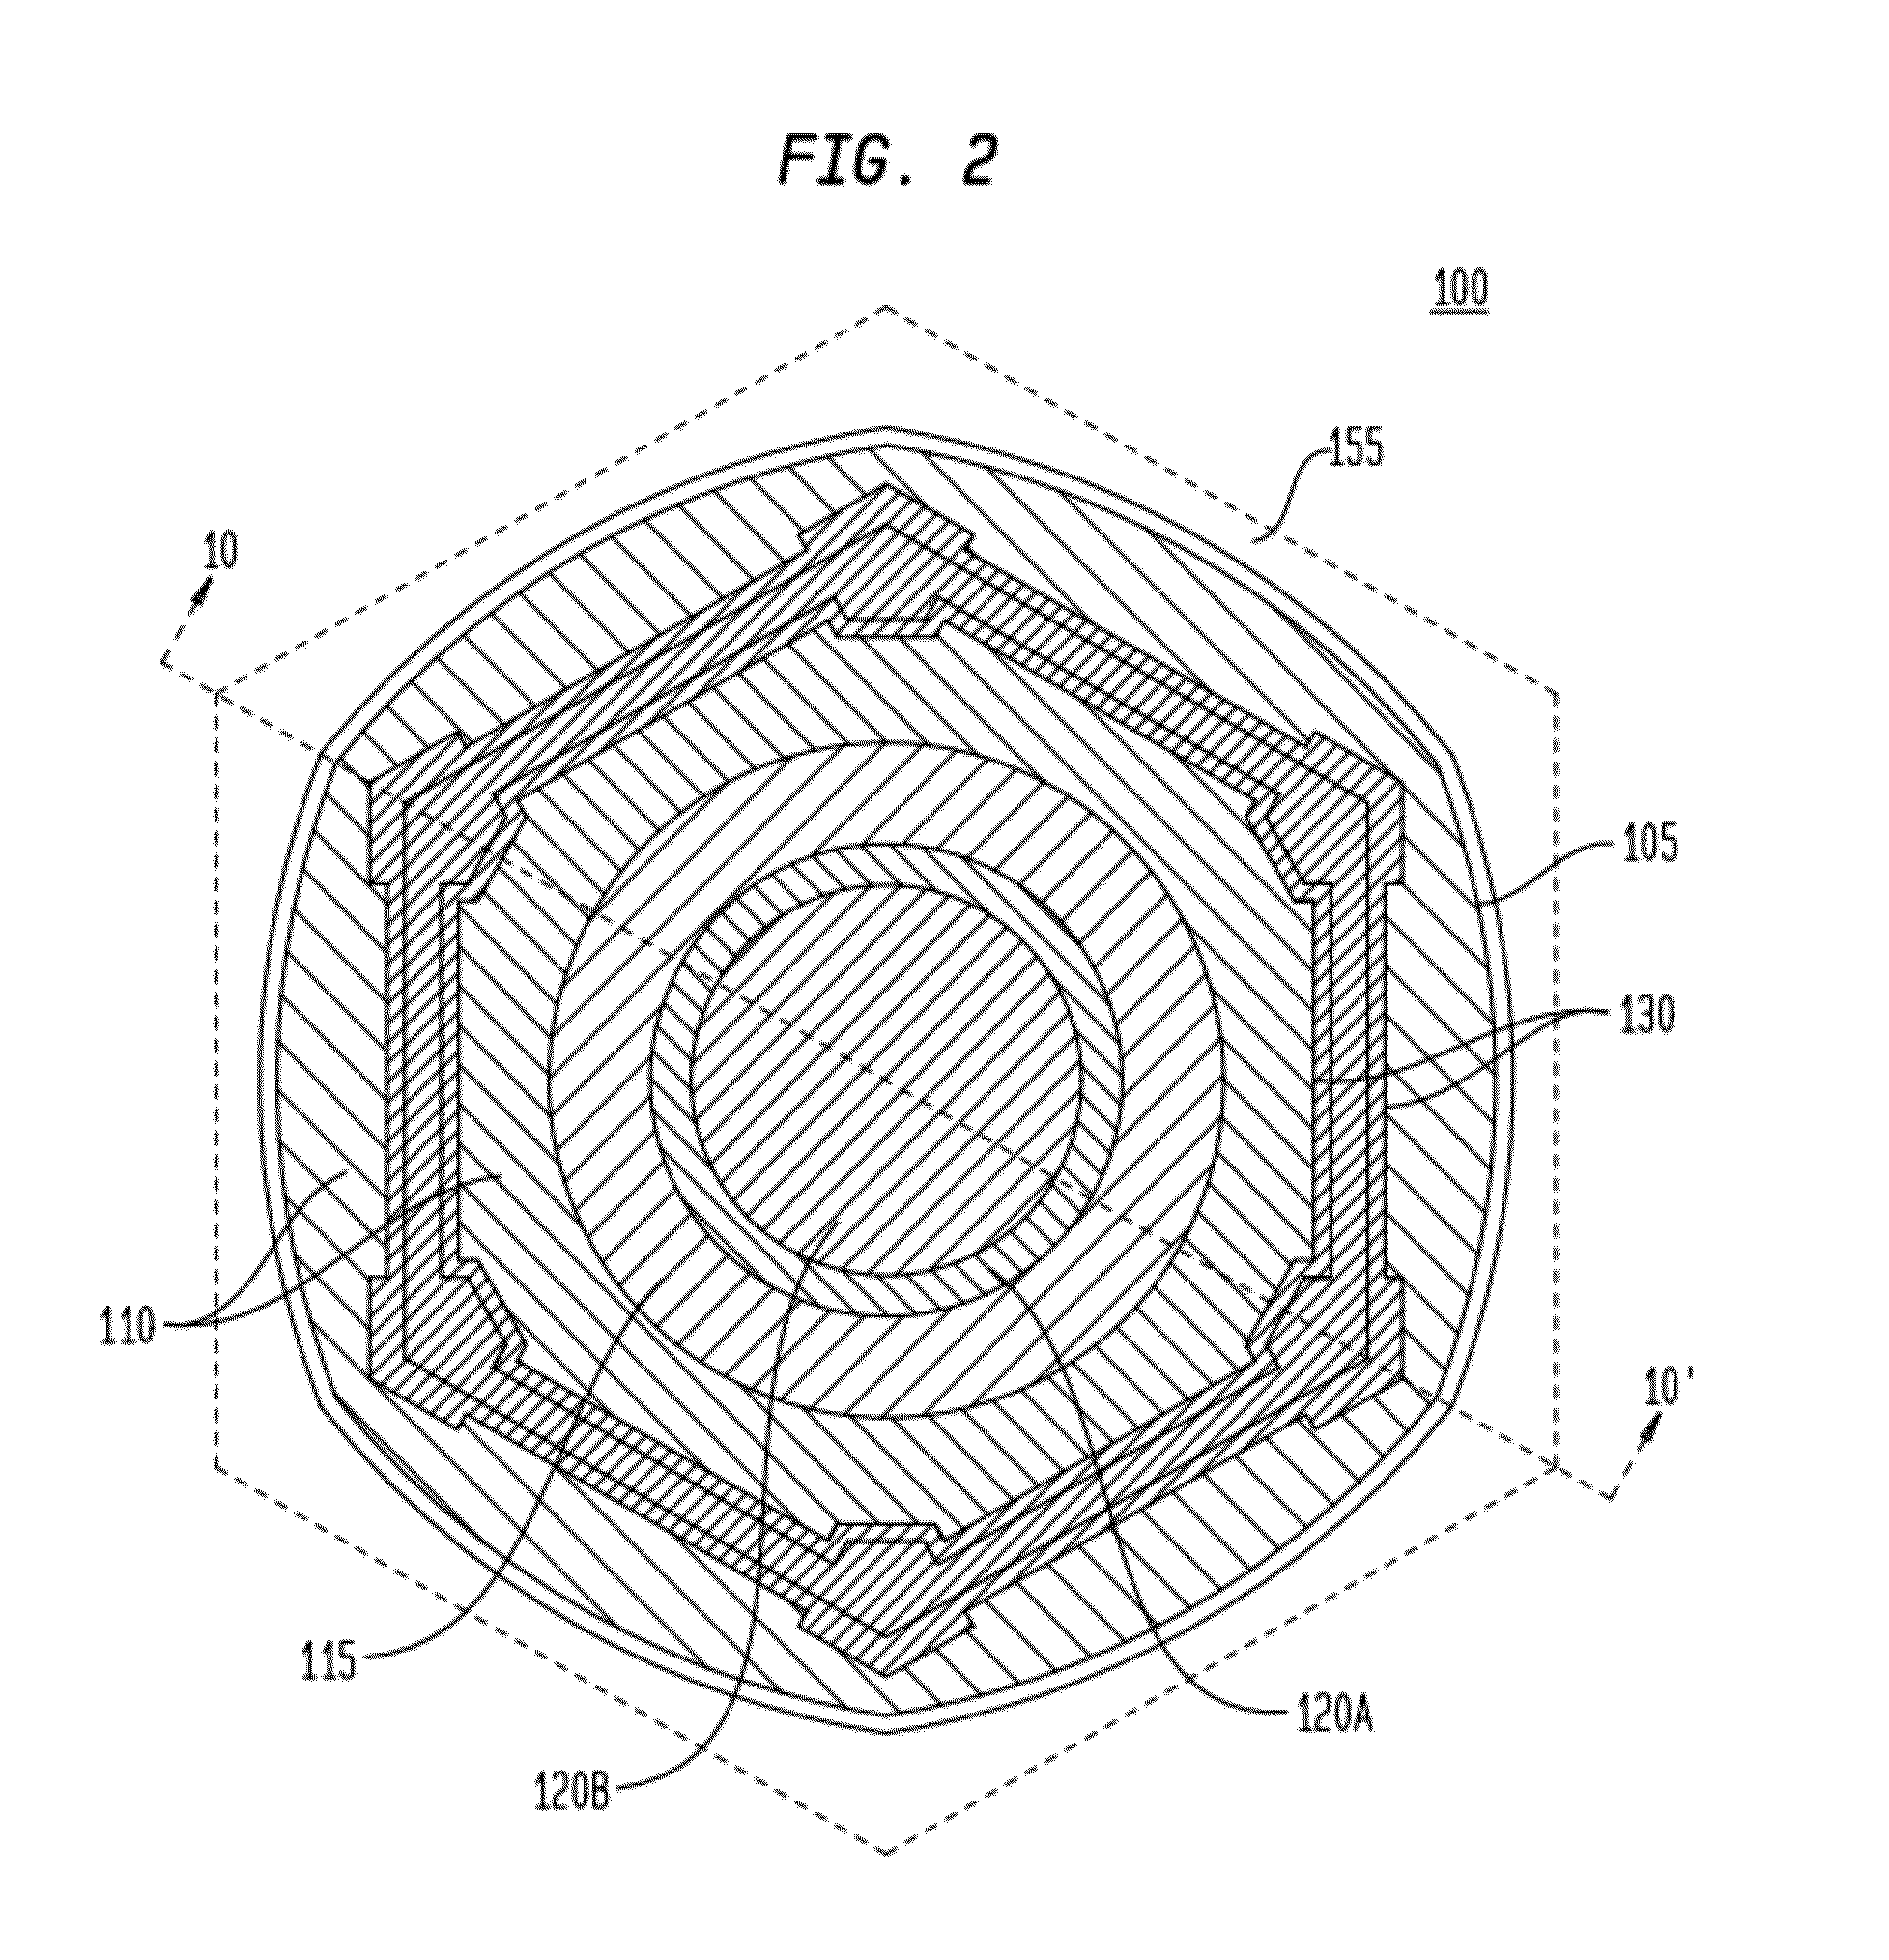 Method of Manufacturing a Light Emitting, Power Generating or Other Electronic Apparatus